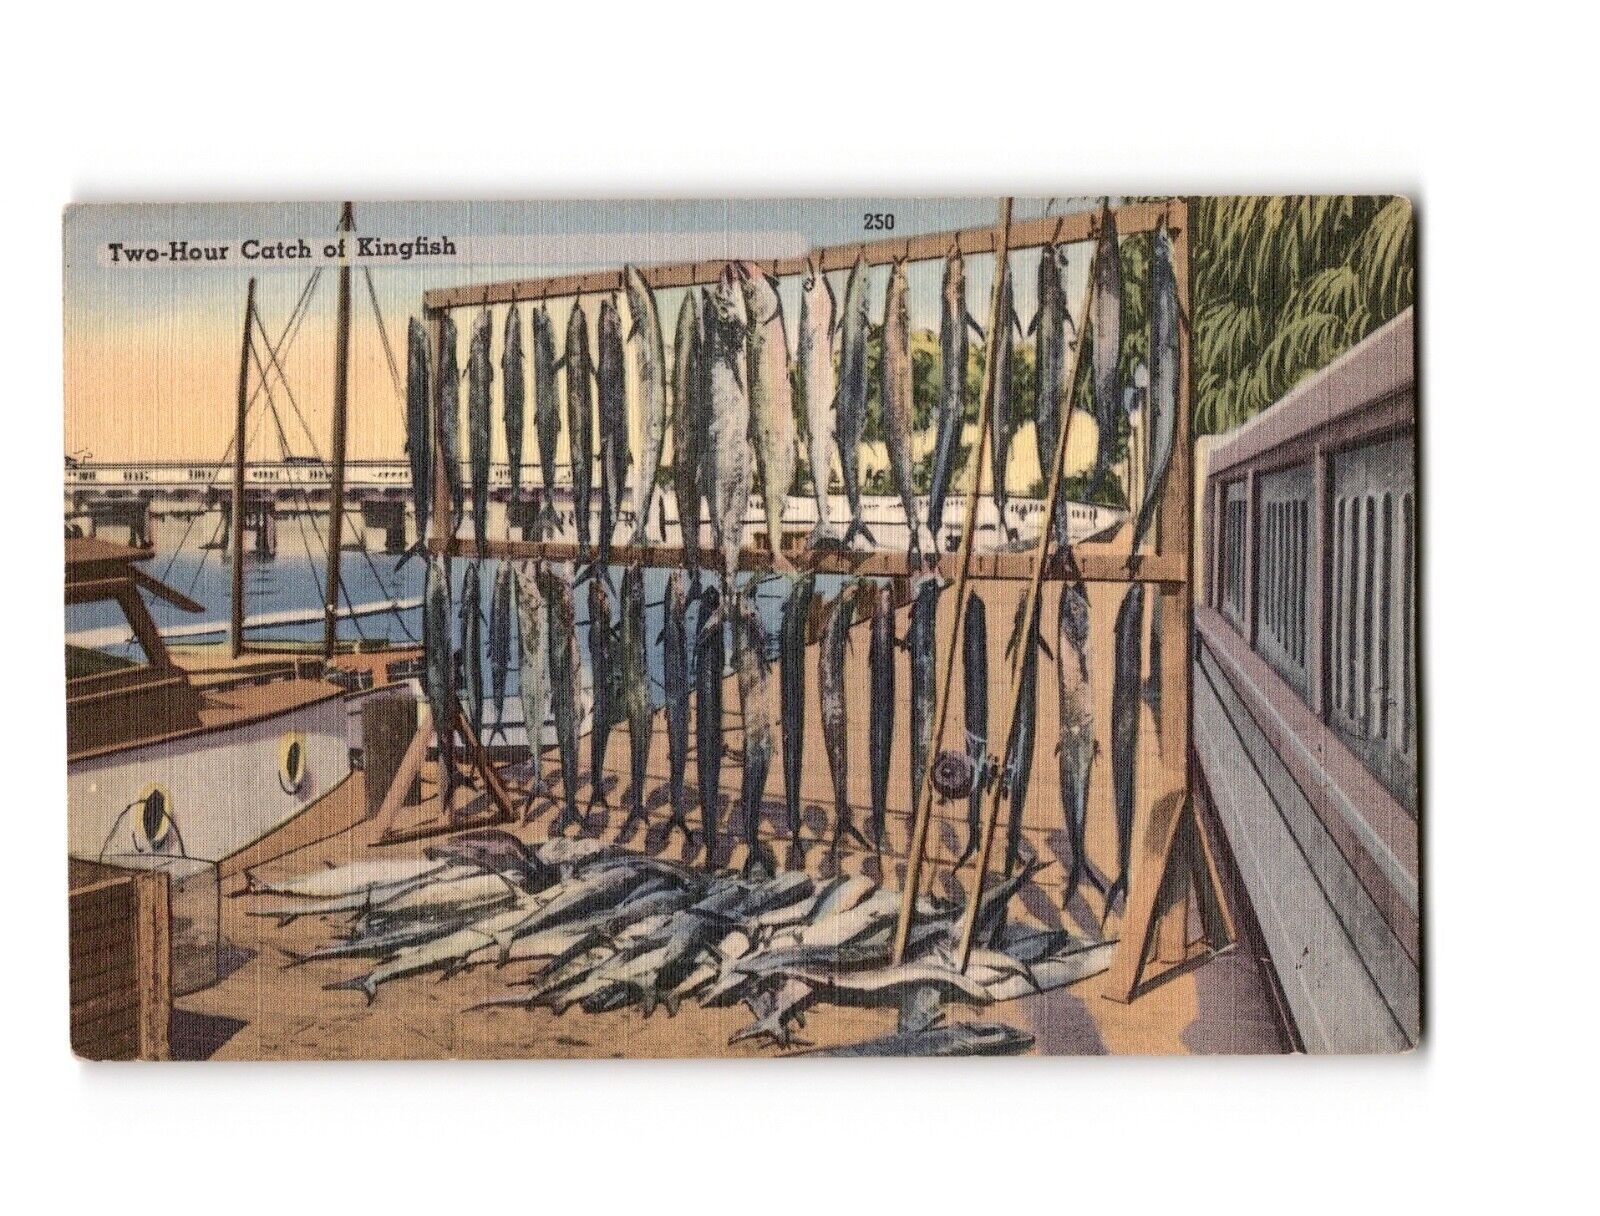 Two-Hour Catch of Kingfish Linen Vintage Postcard